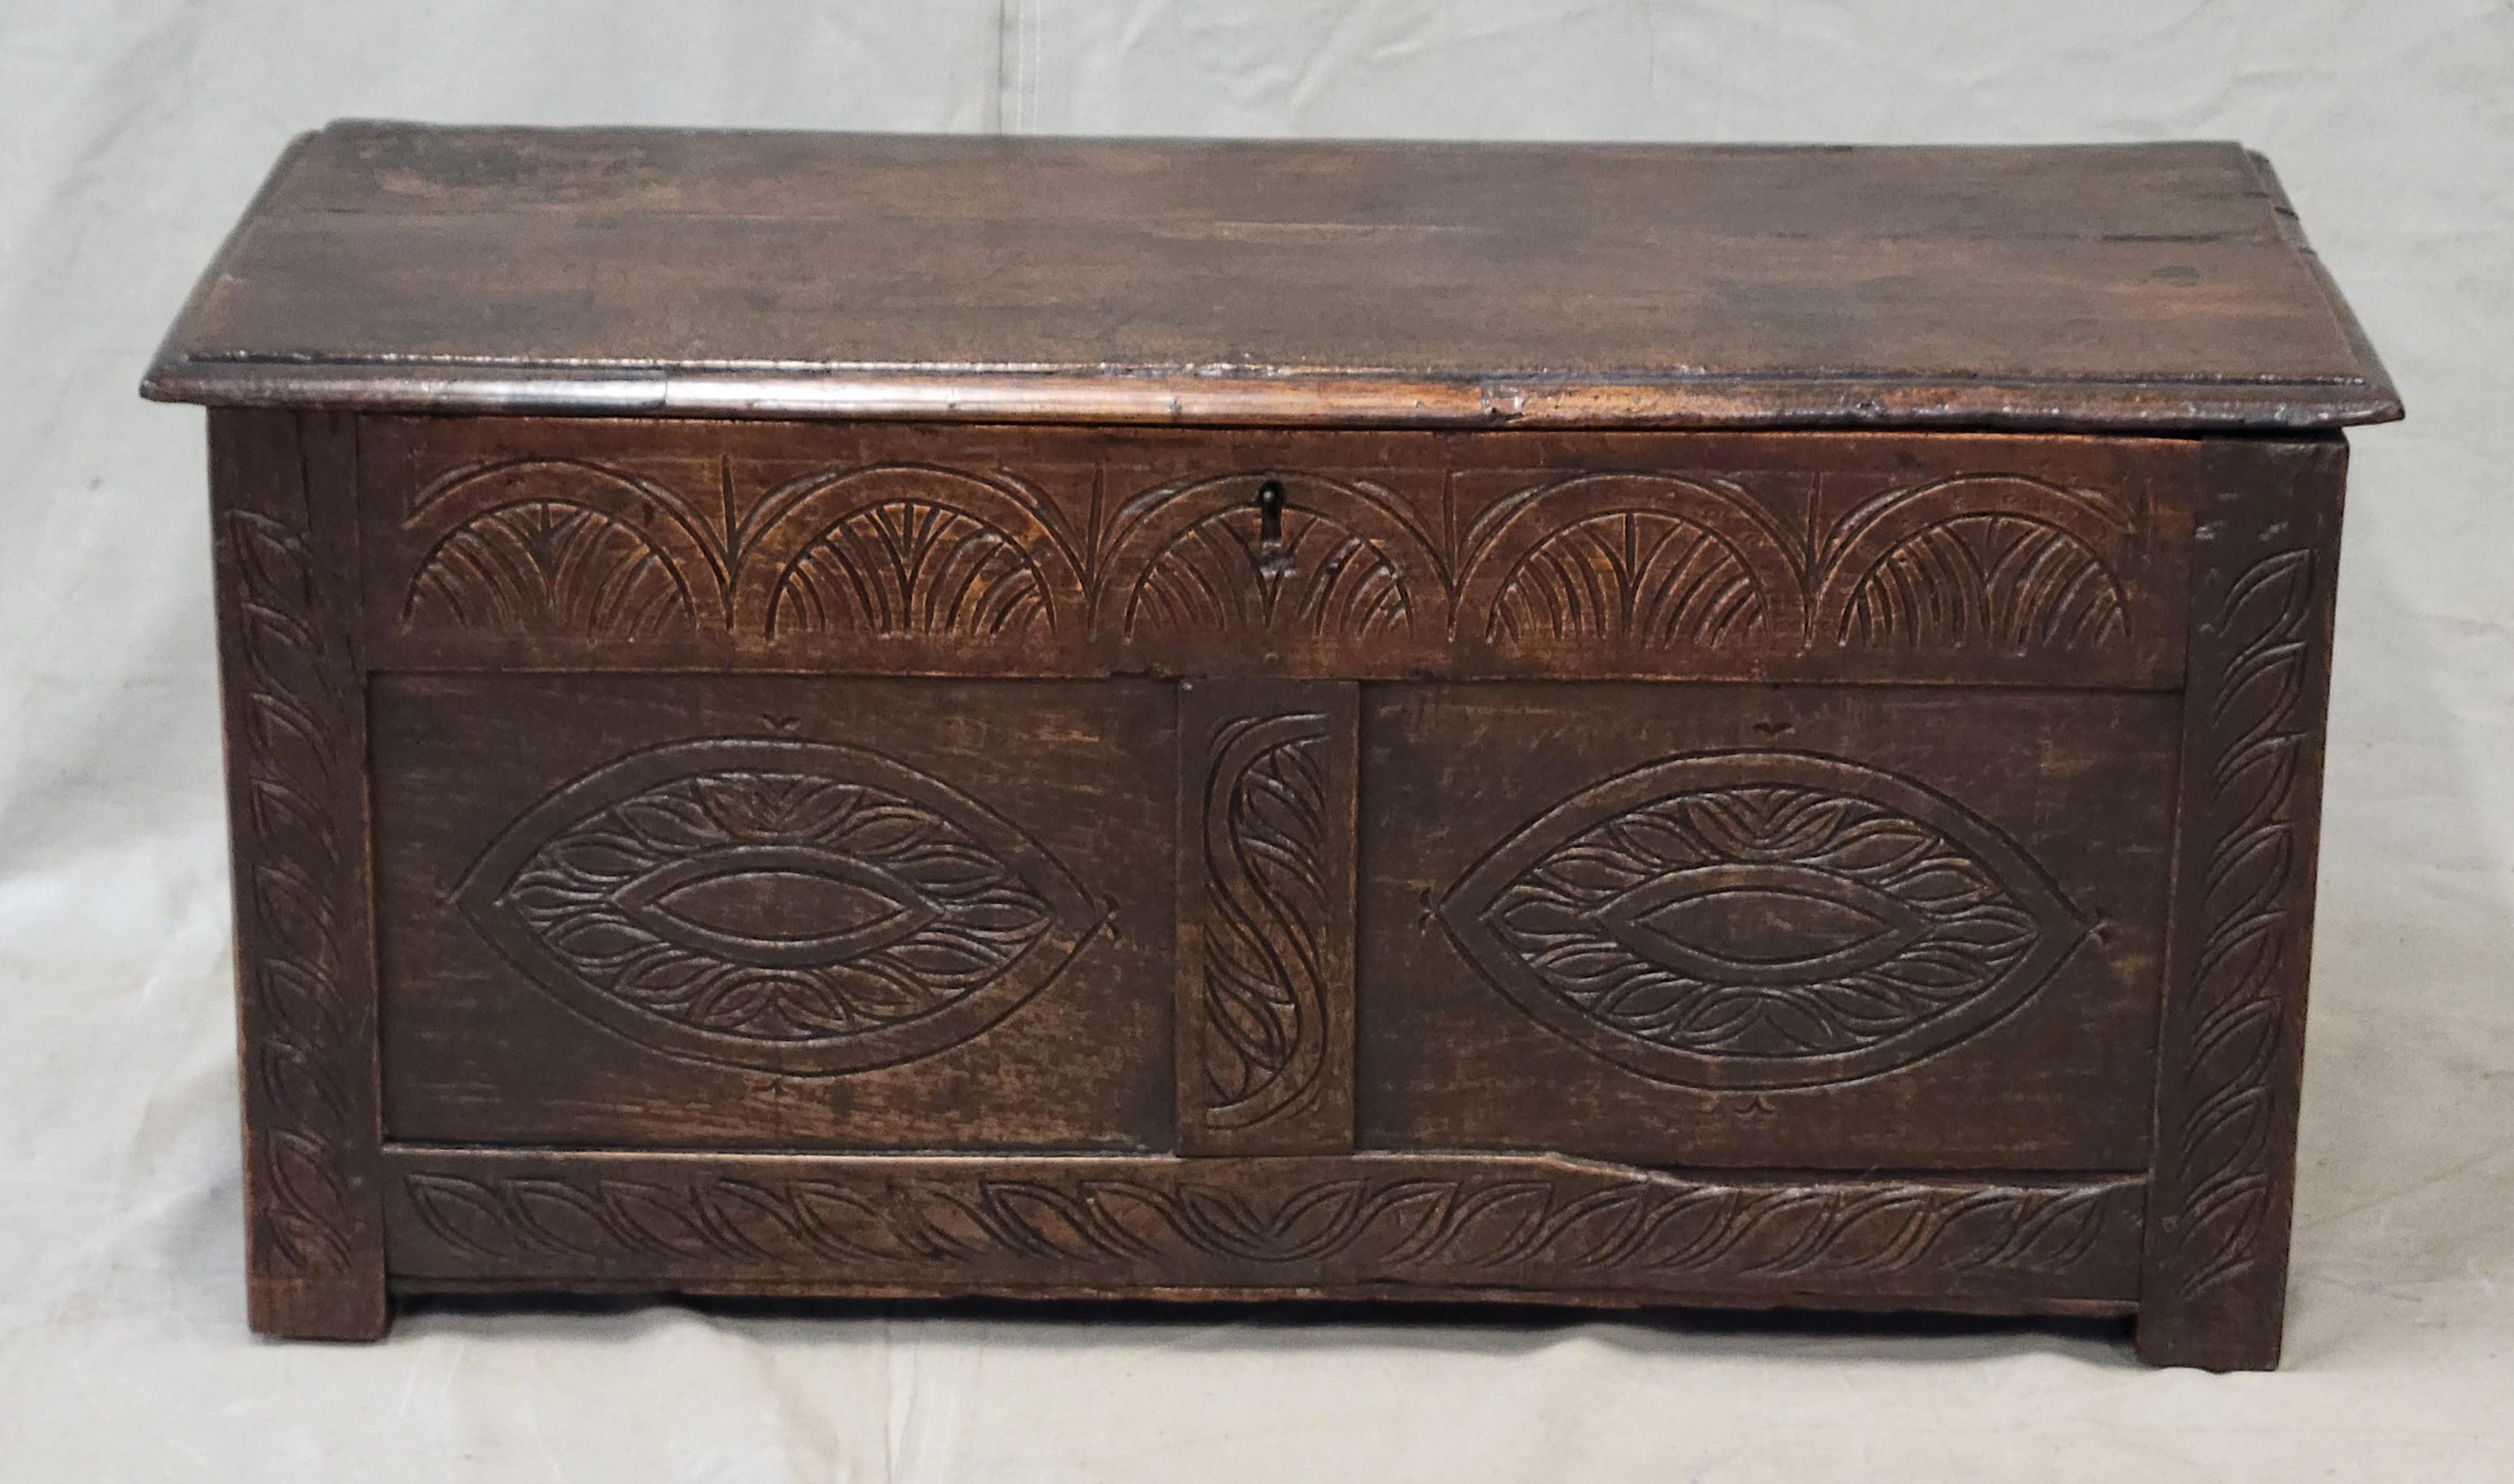 A rustic, classic late 18th century or early 19th century Georgian period English carved oak storage trunk or coffer. Incised decorative carved patterns in the front. It could be used as a coffee table, at the foot of a bed for storage, or in a